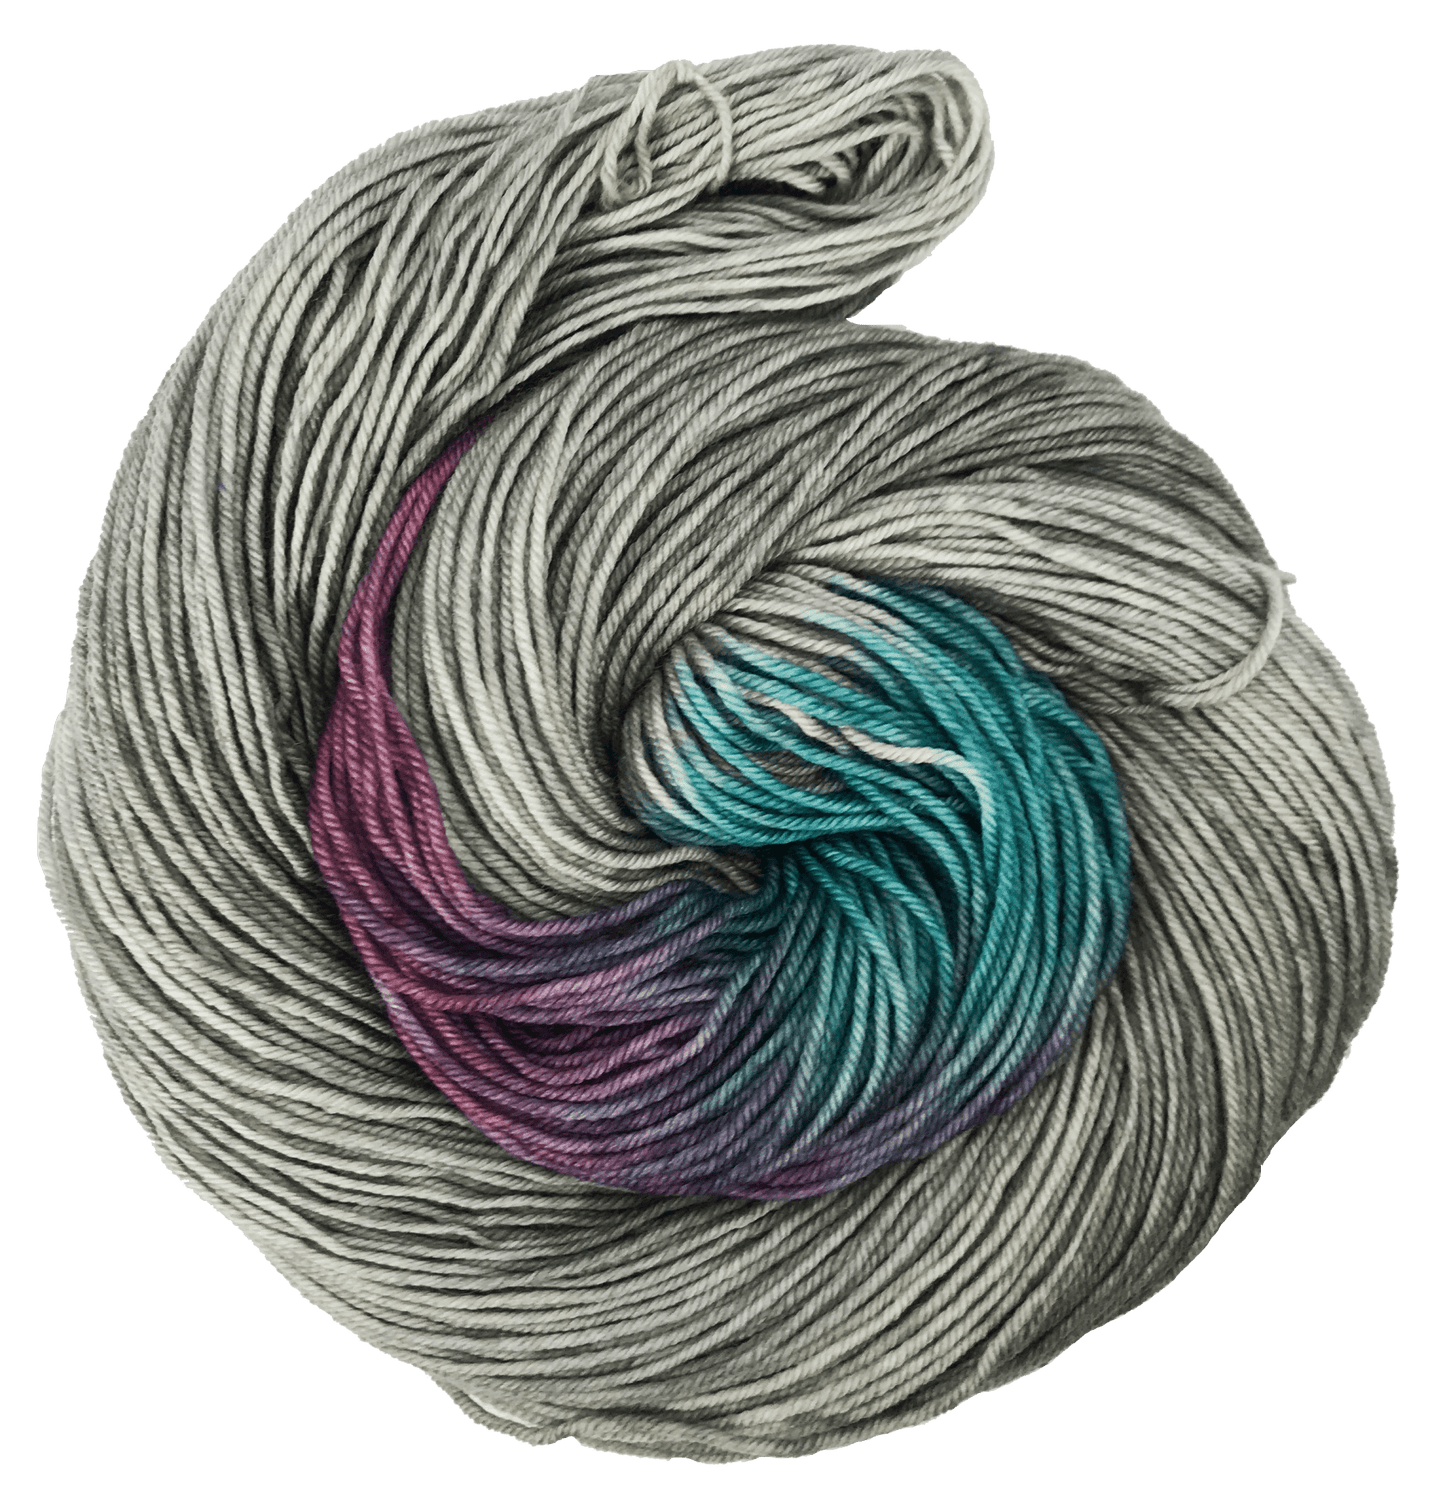 March Hare Colorburst from Wonderland Yarn